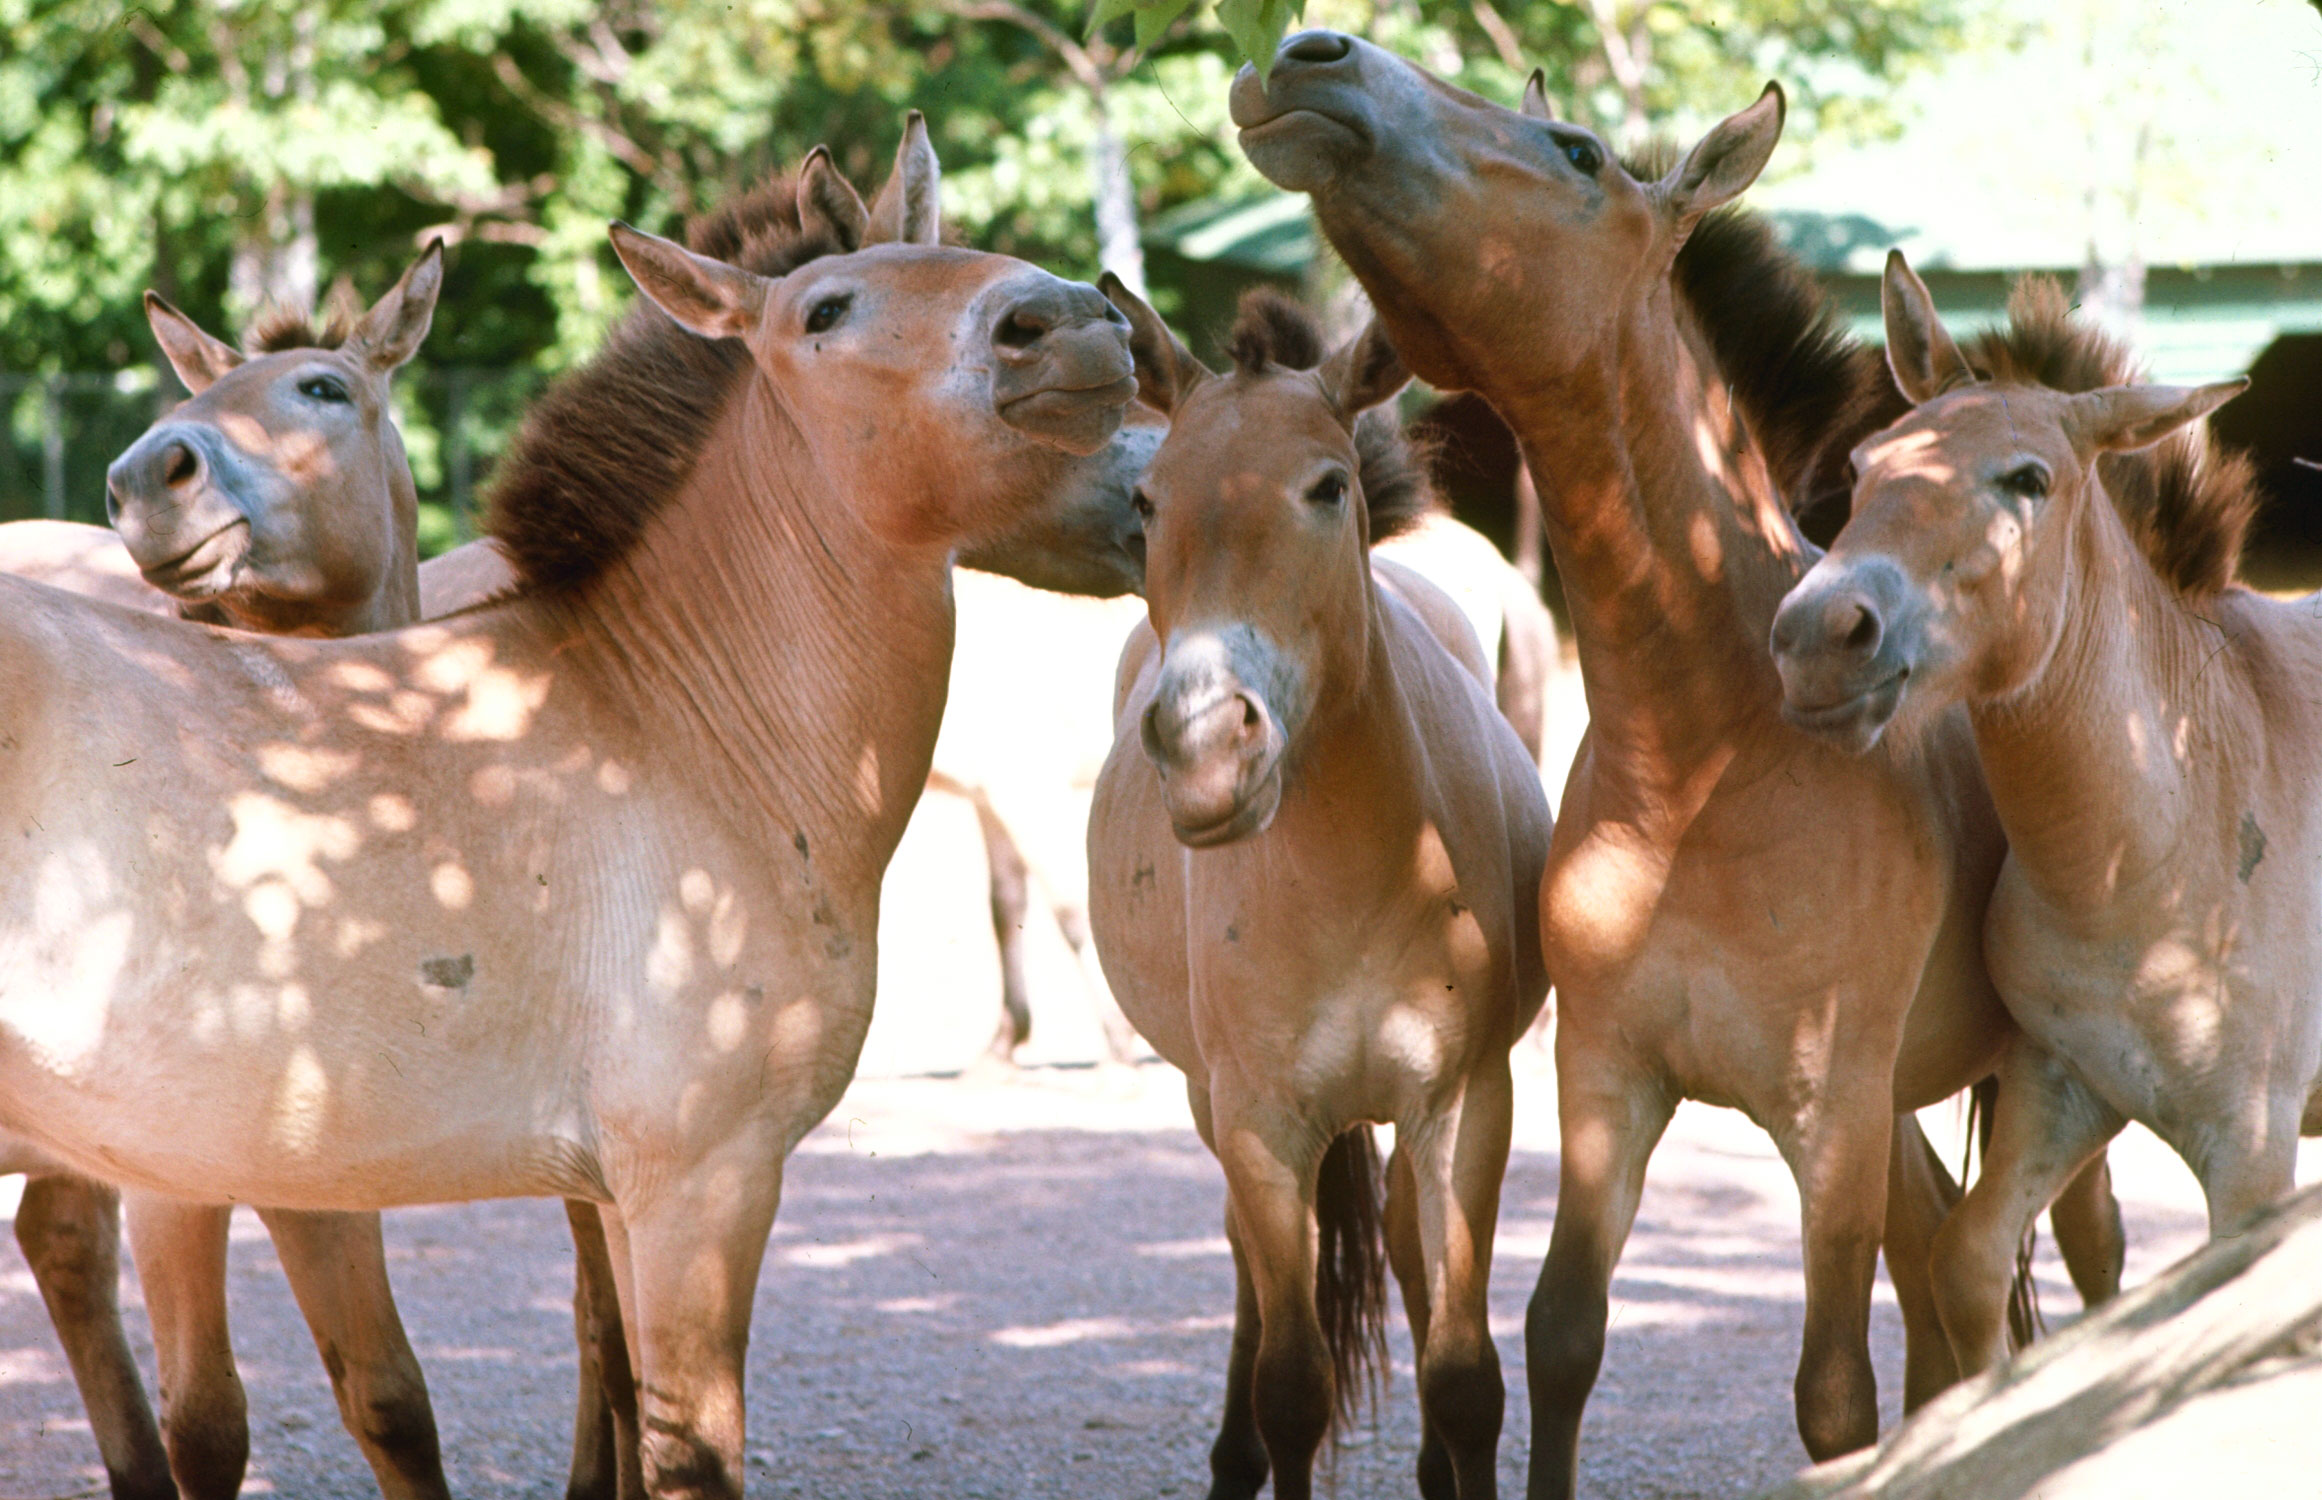 Przewalski's wild horses, believed extinct in their habitat on the Mongolian steppes, are bred at the Catskill Game Farm, a private zoo in Catskill, N.Y. There are 120 of these horses in the U.S. and Europe, and in 20 years breeders hope to release some back into the wild.